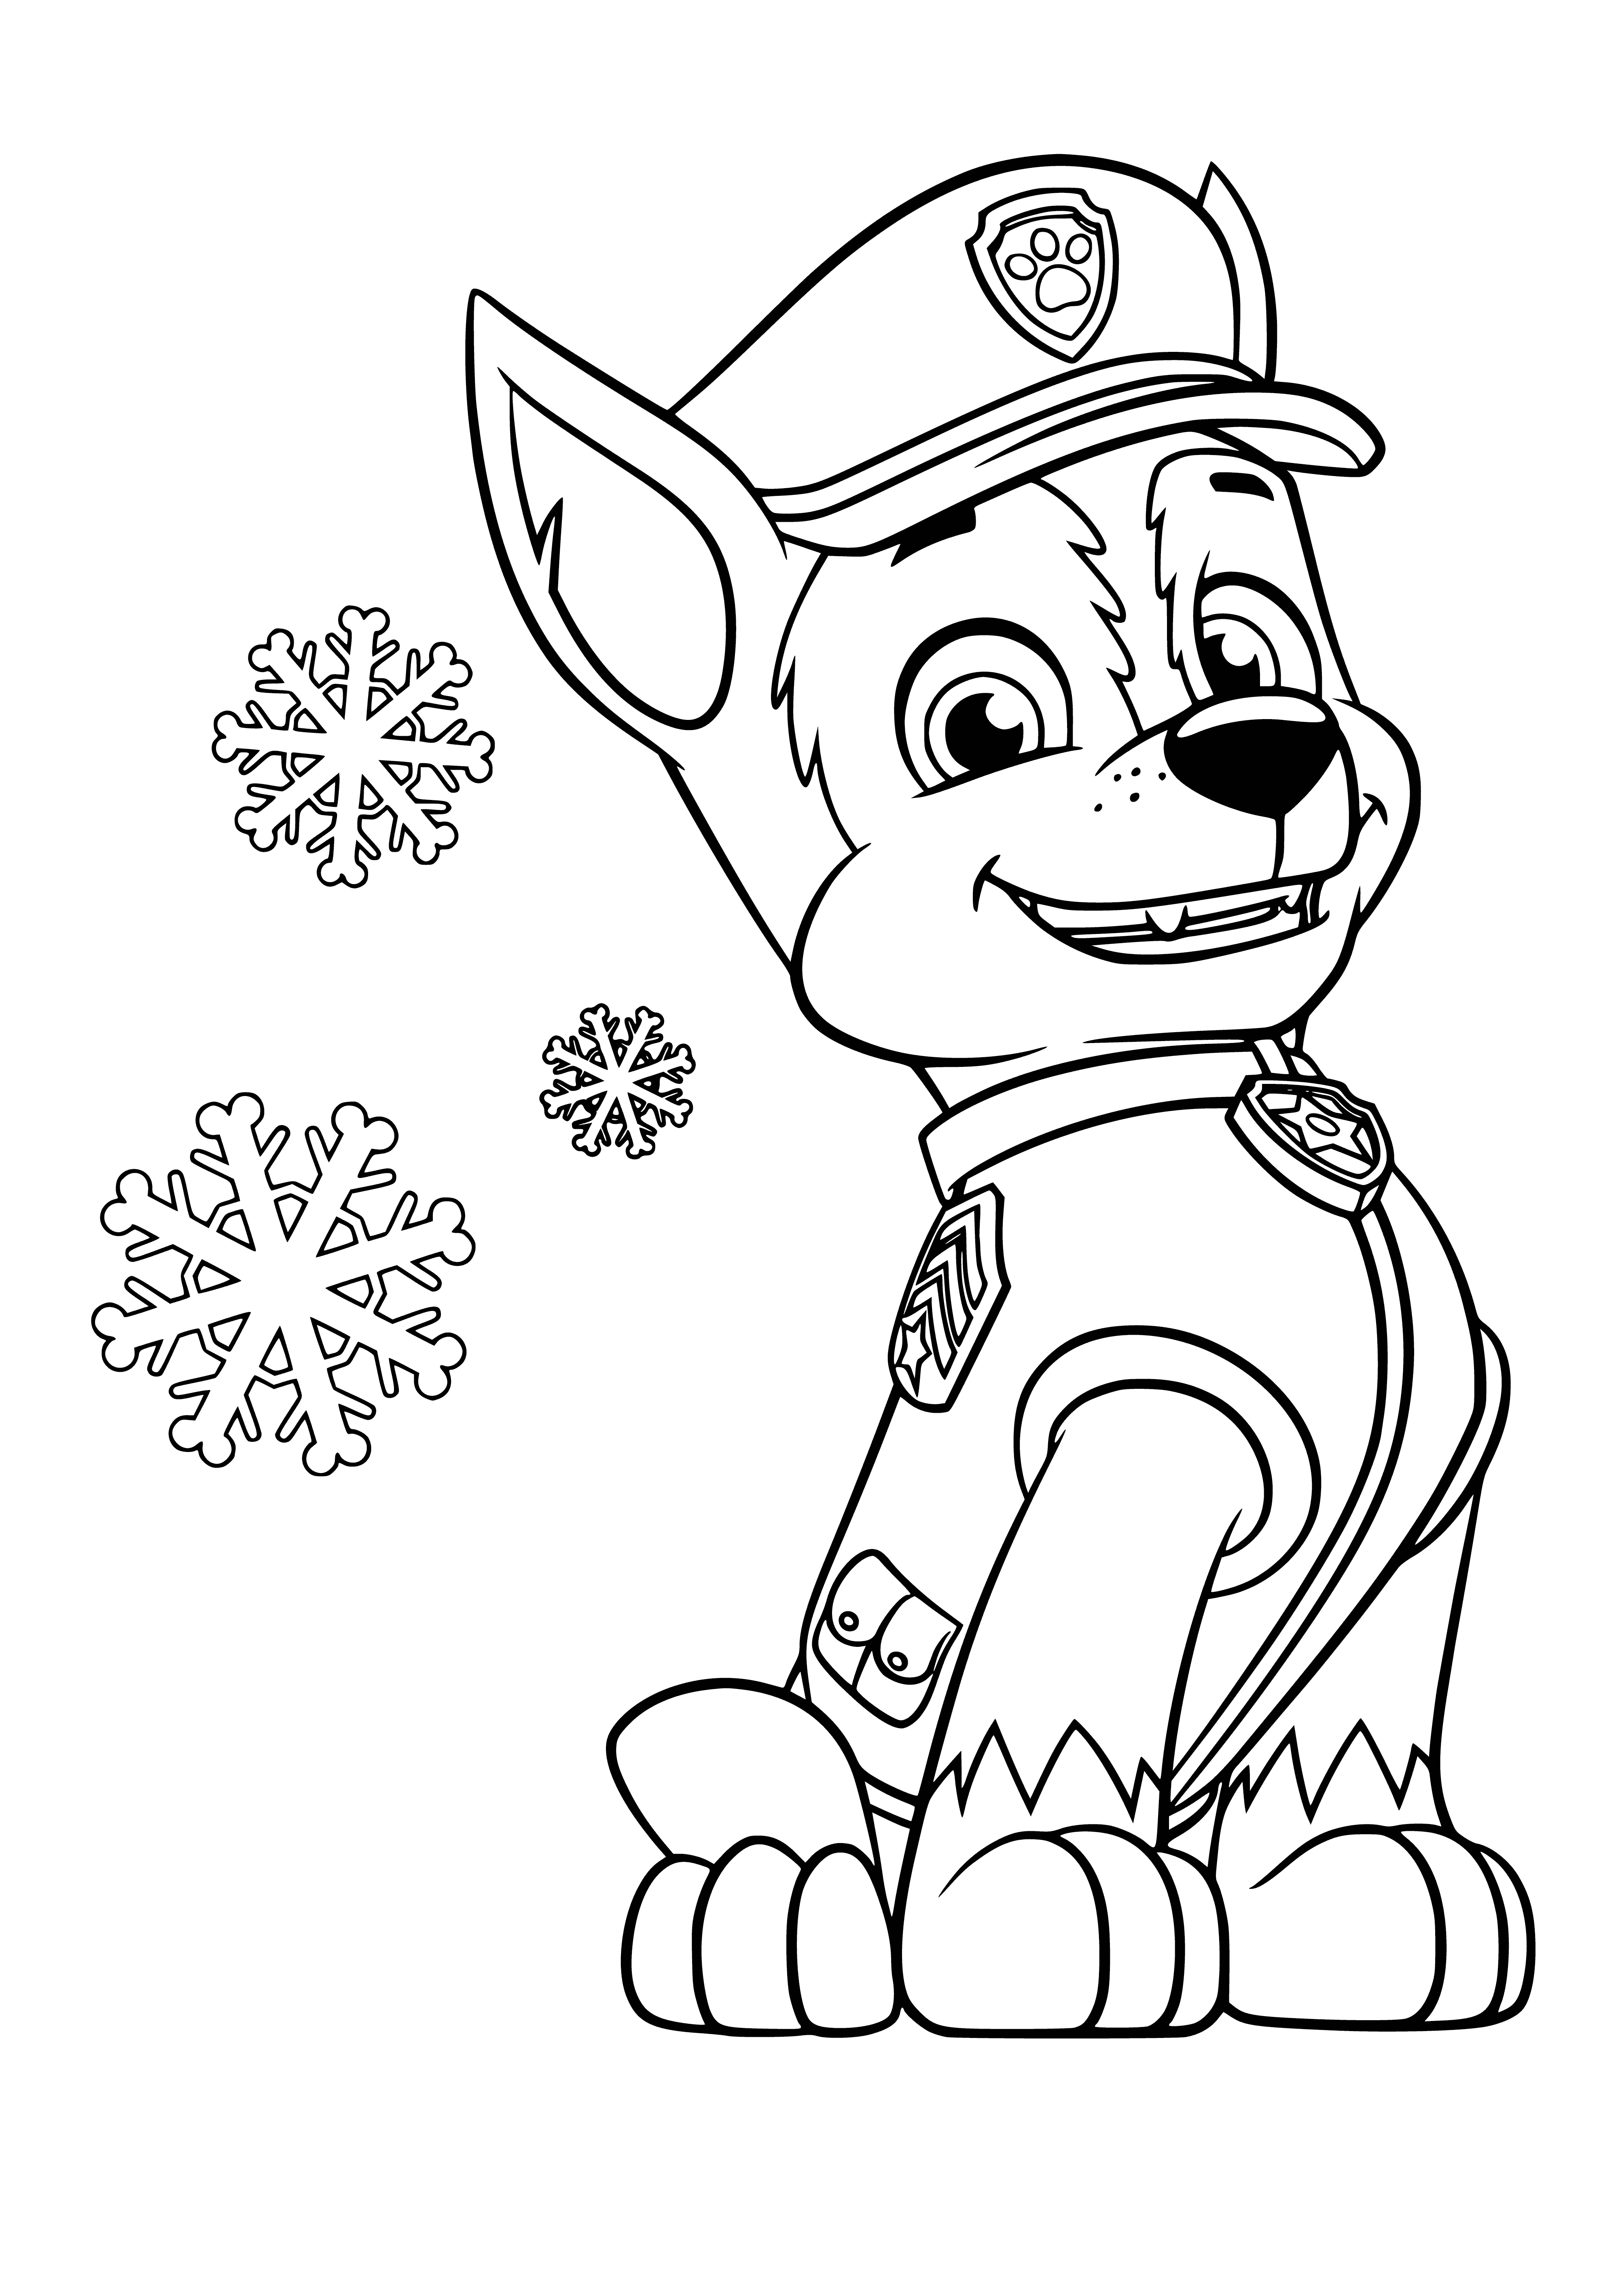 Racer coloring page